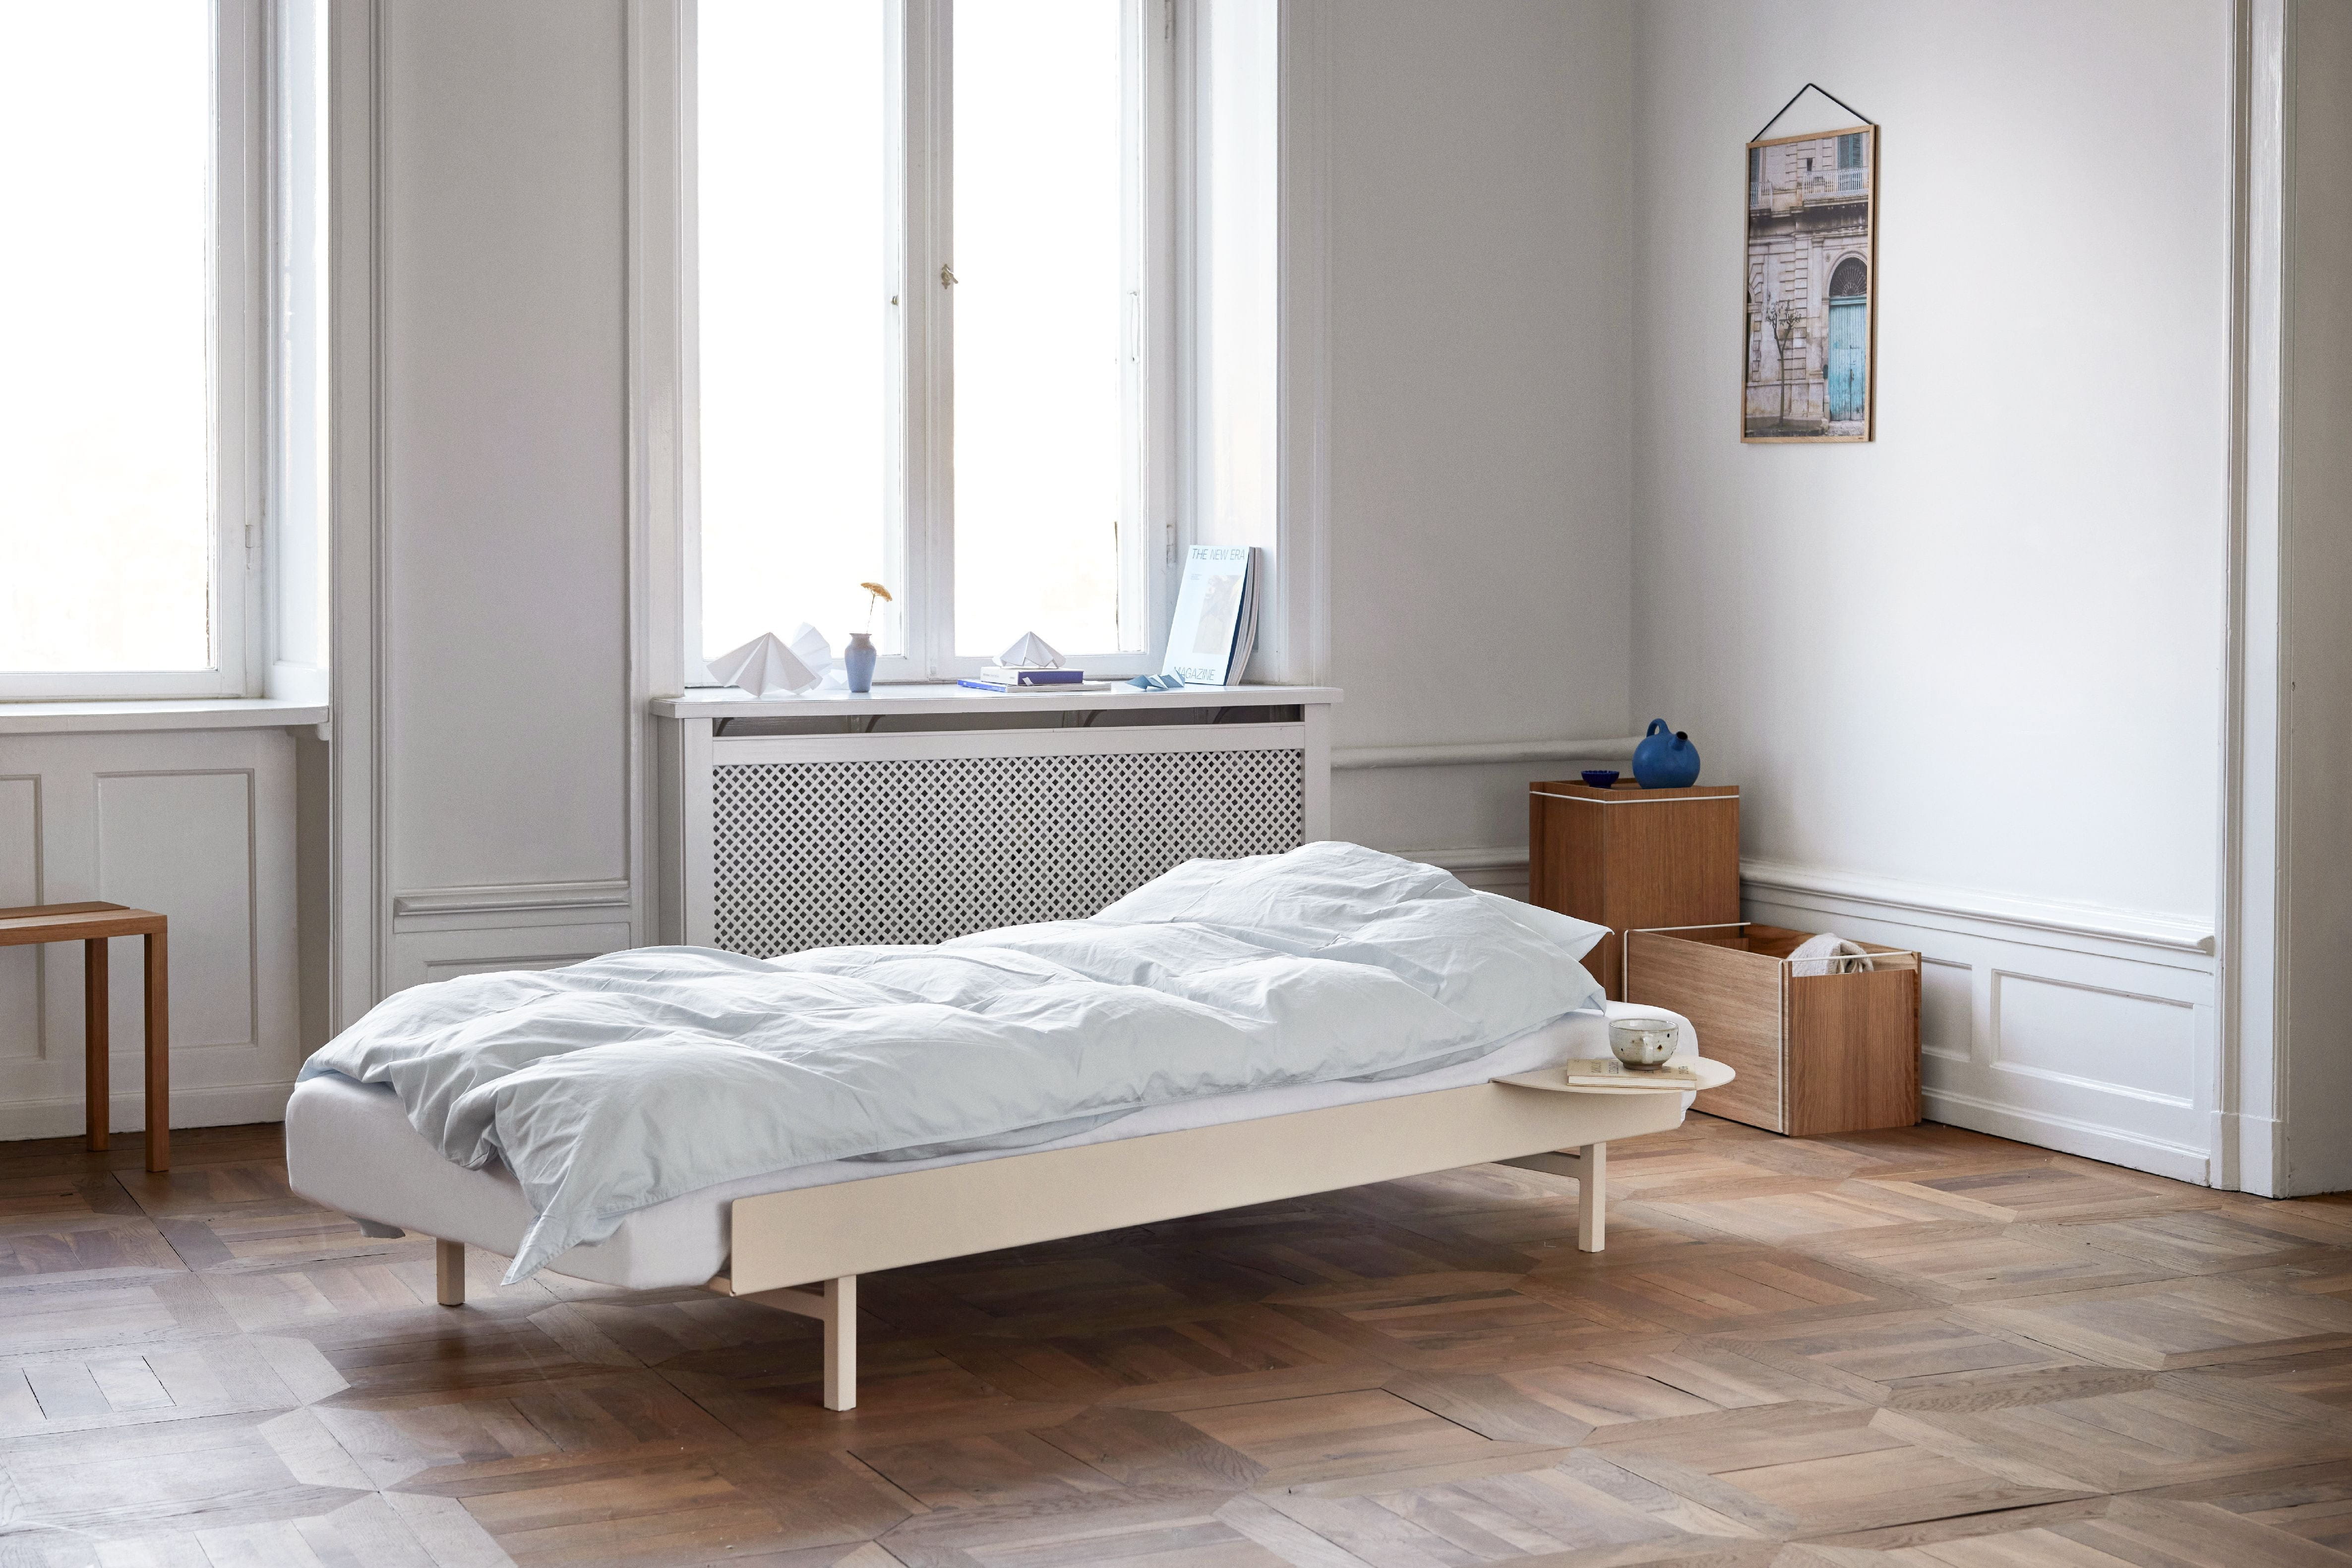 Moebe Bed With Bed Slats 90 Cm, Sand